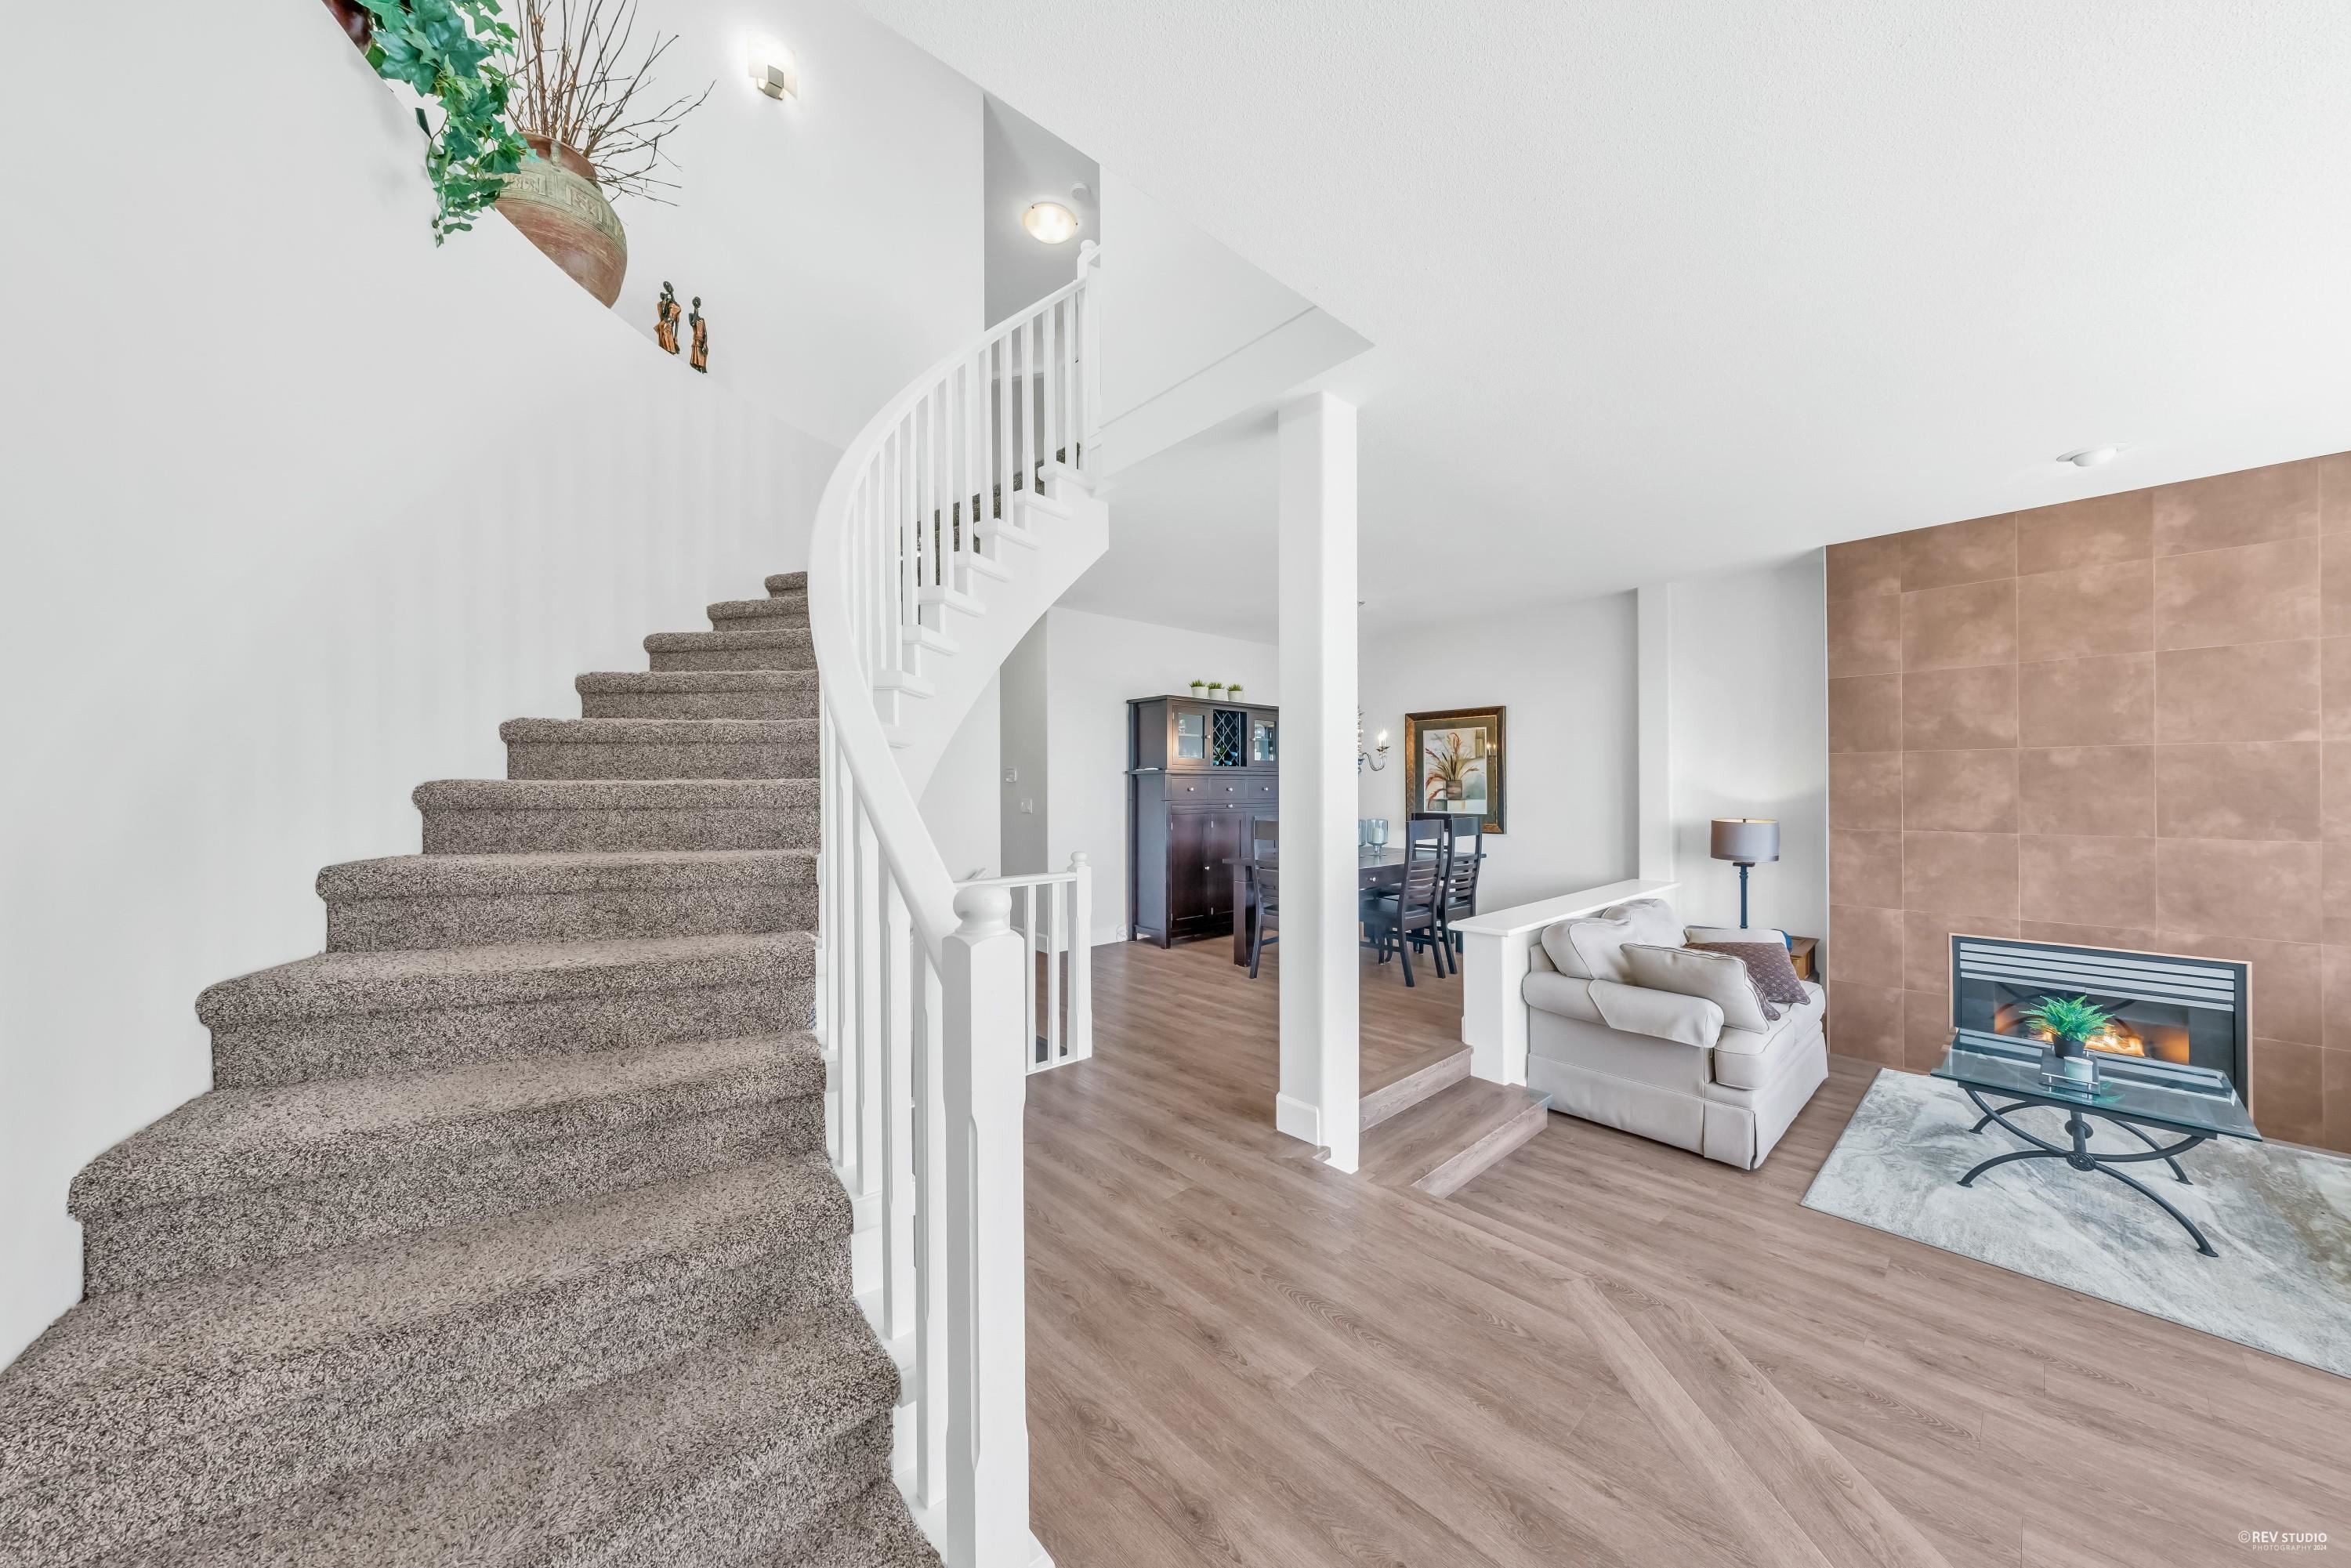 Gorgeous dramatic staircase leads you to the upper level and master suite.